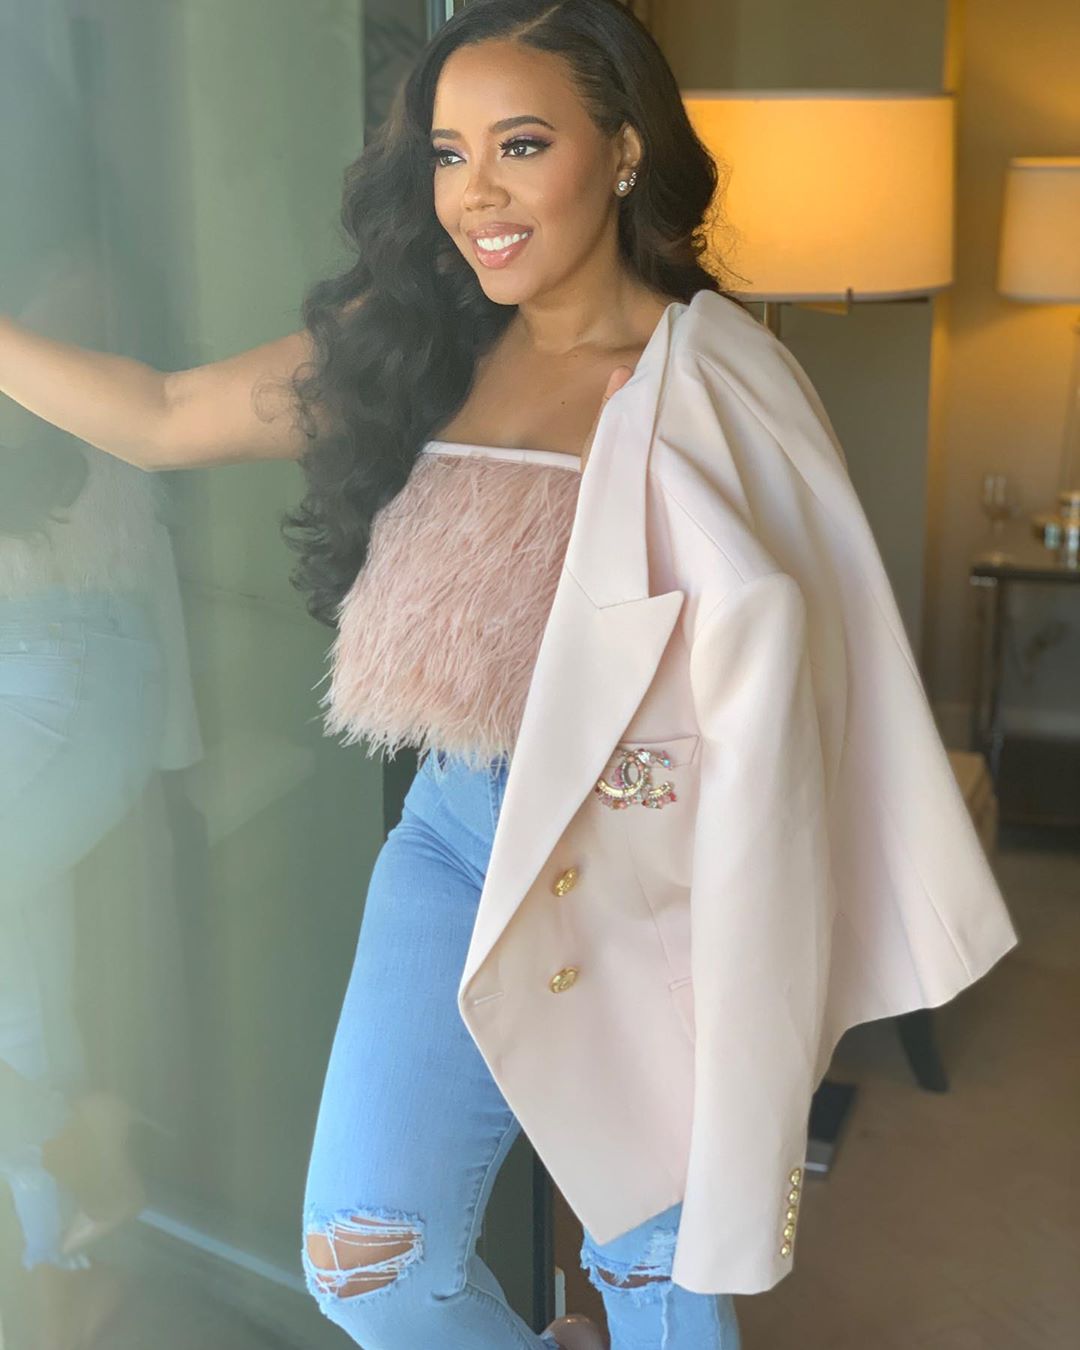 Adorably Sexy Angela Simmons Fashion Pic Sends Fans Swooning